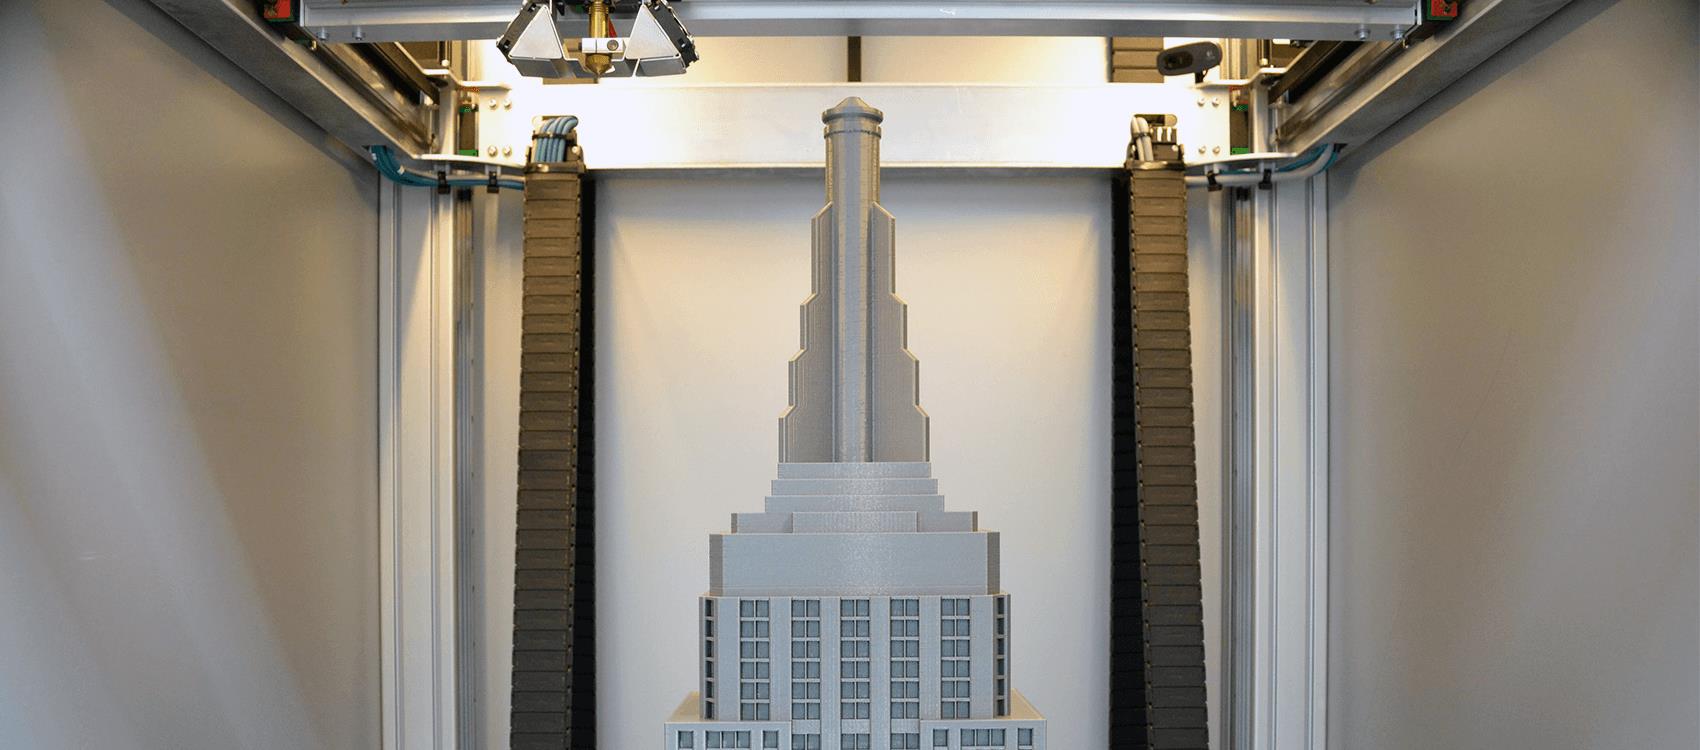 Top of the Empire State Building 3D printer by Builder 3D.